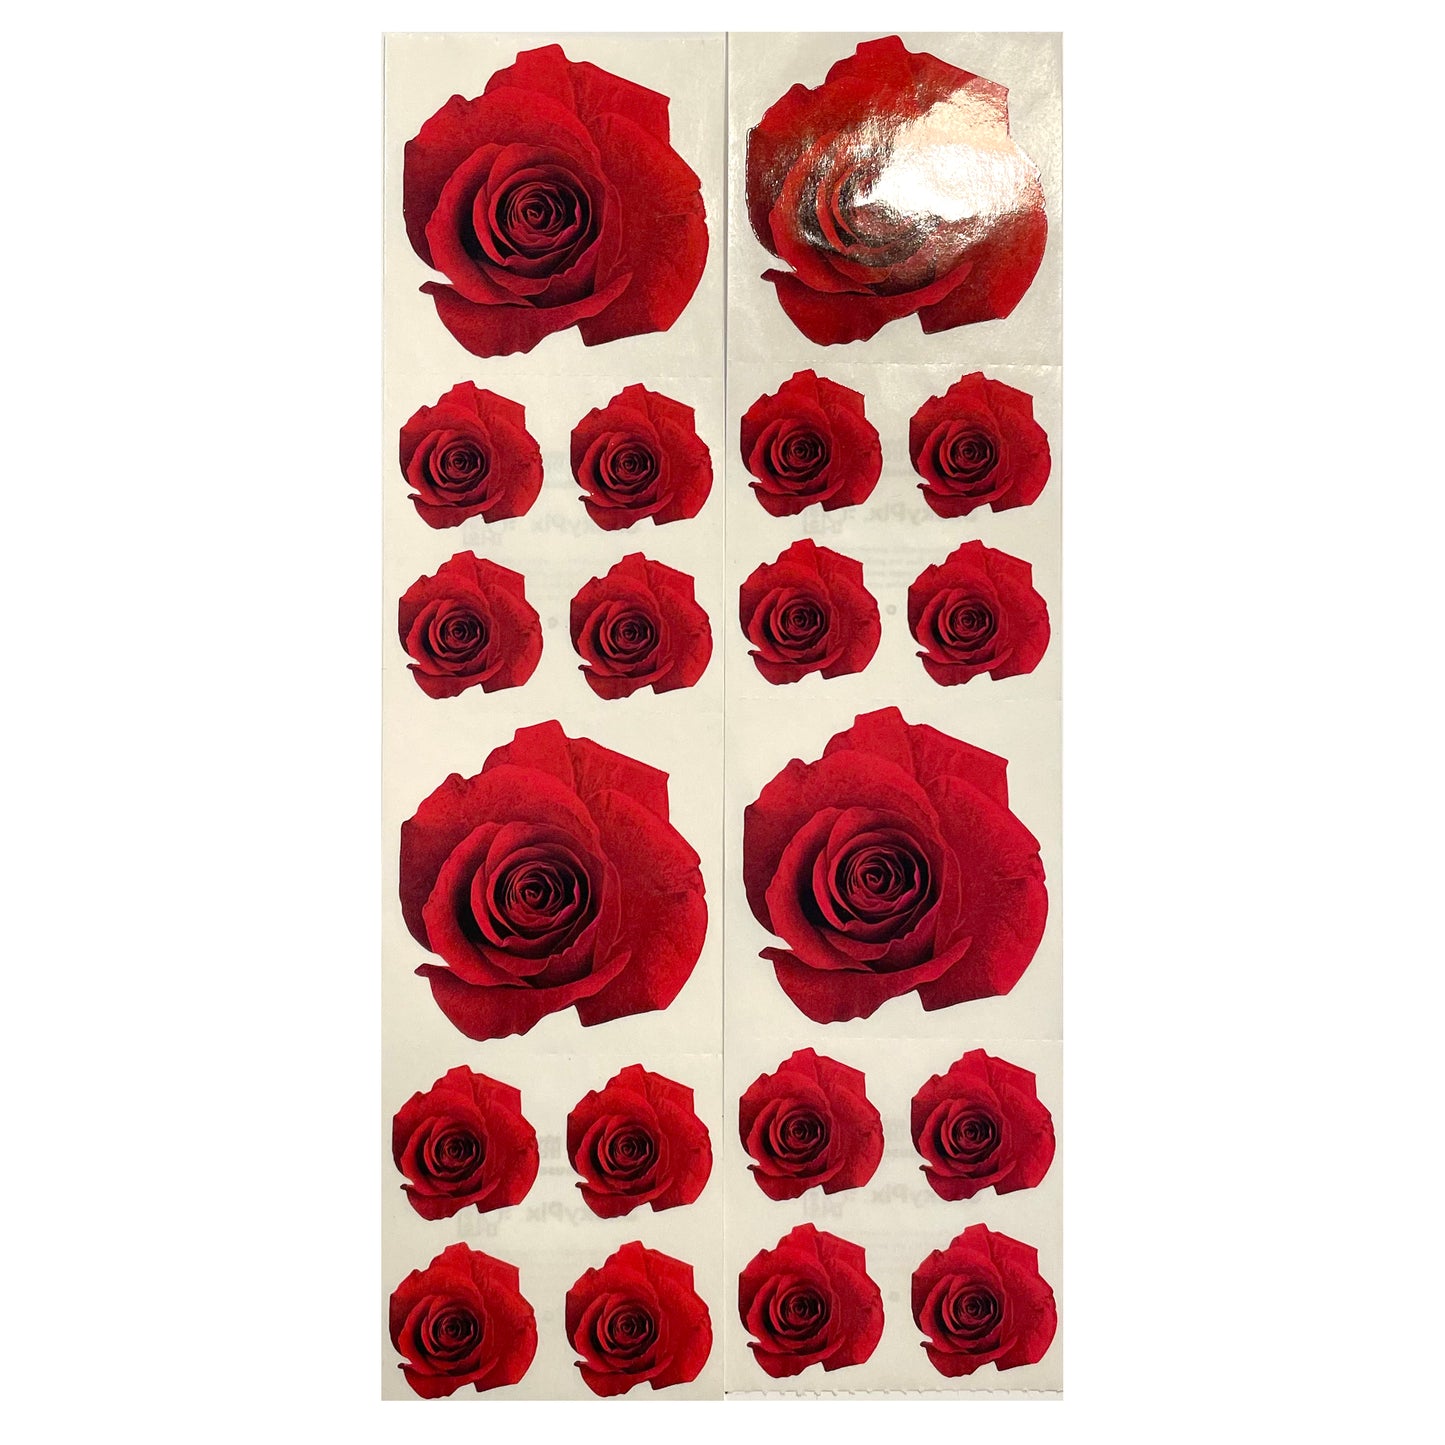 Paper House: Photoreal Red Rose Stickers - 8 pcs